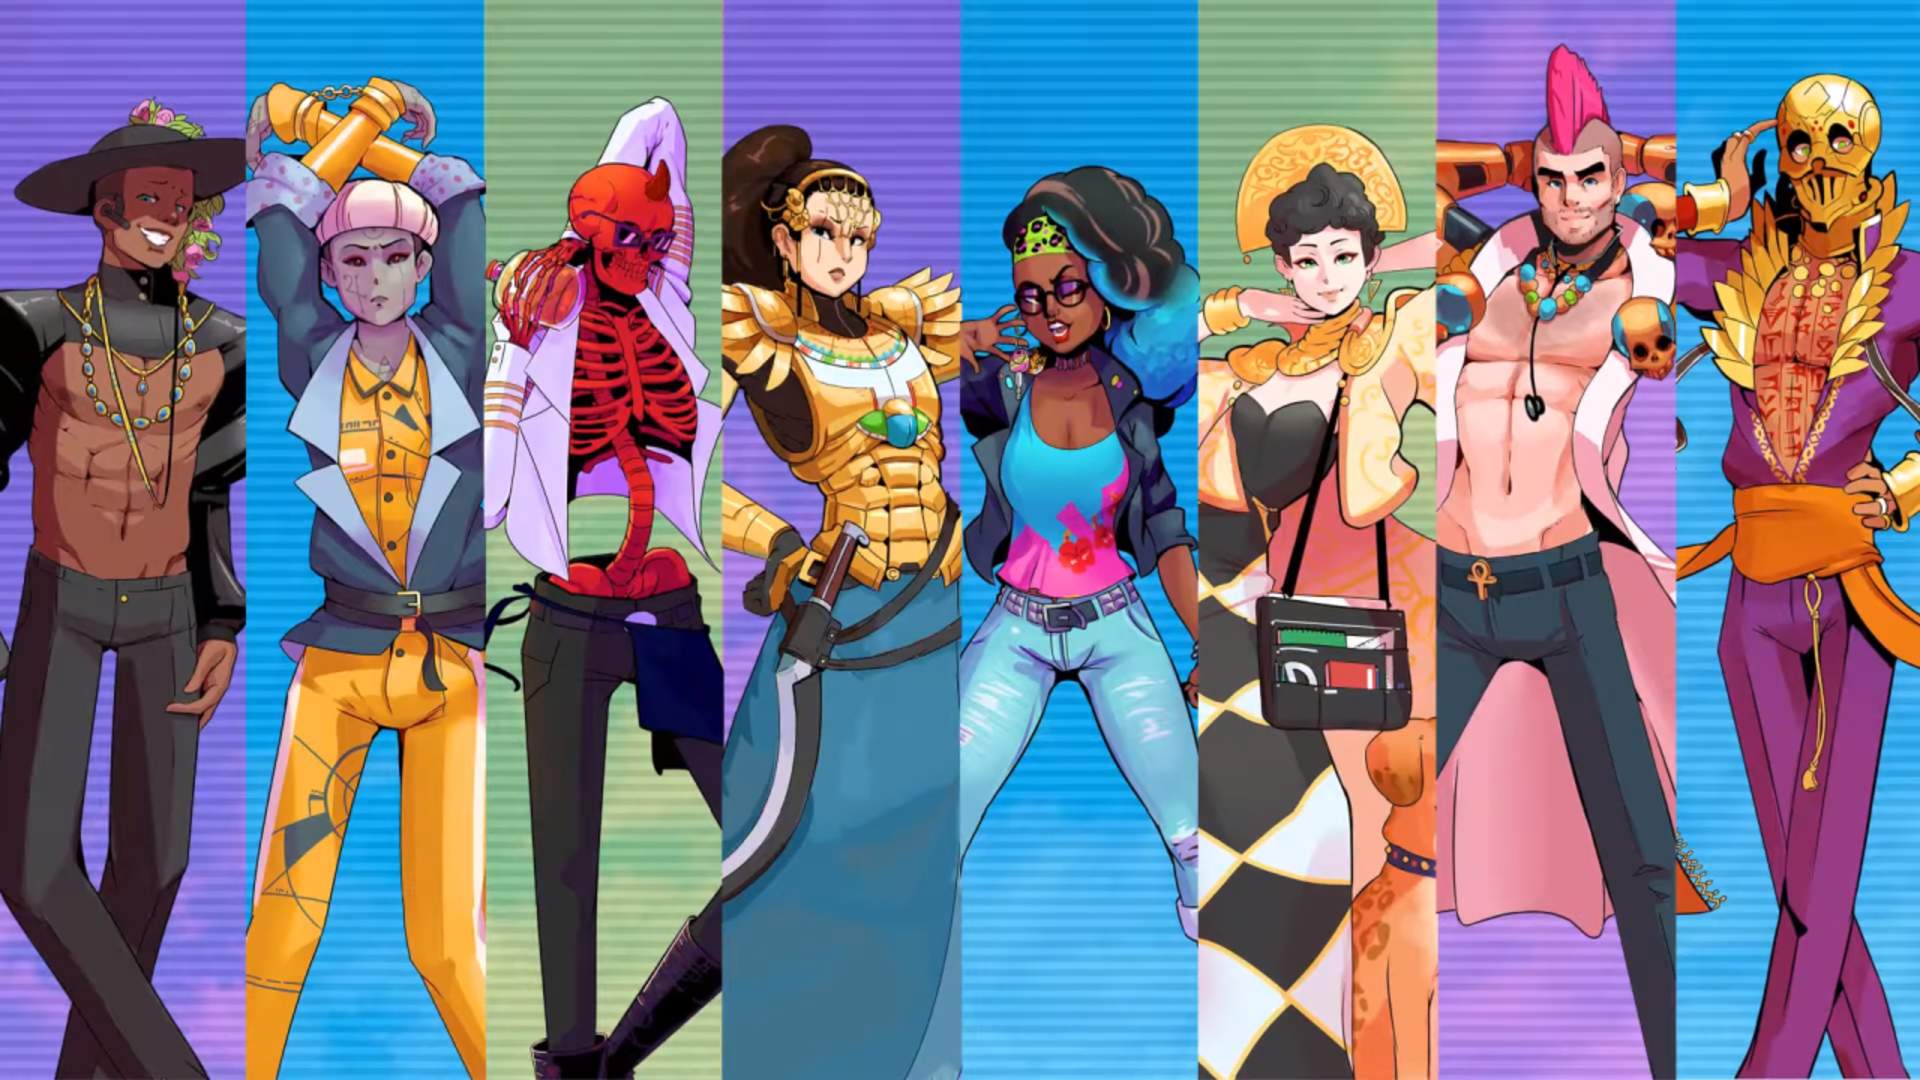 Stolen from the fan wiki, but from left to right: Yuri Night, Sam Day Break, Grand Marshal Akiko 14, Lydia Day Break, Carmelina Silence, Doctor Doom Jazz, Witness to the End. Get a load of this character design!